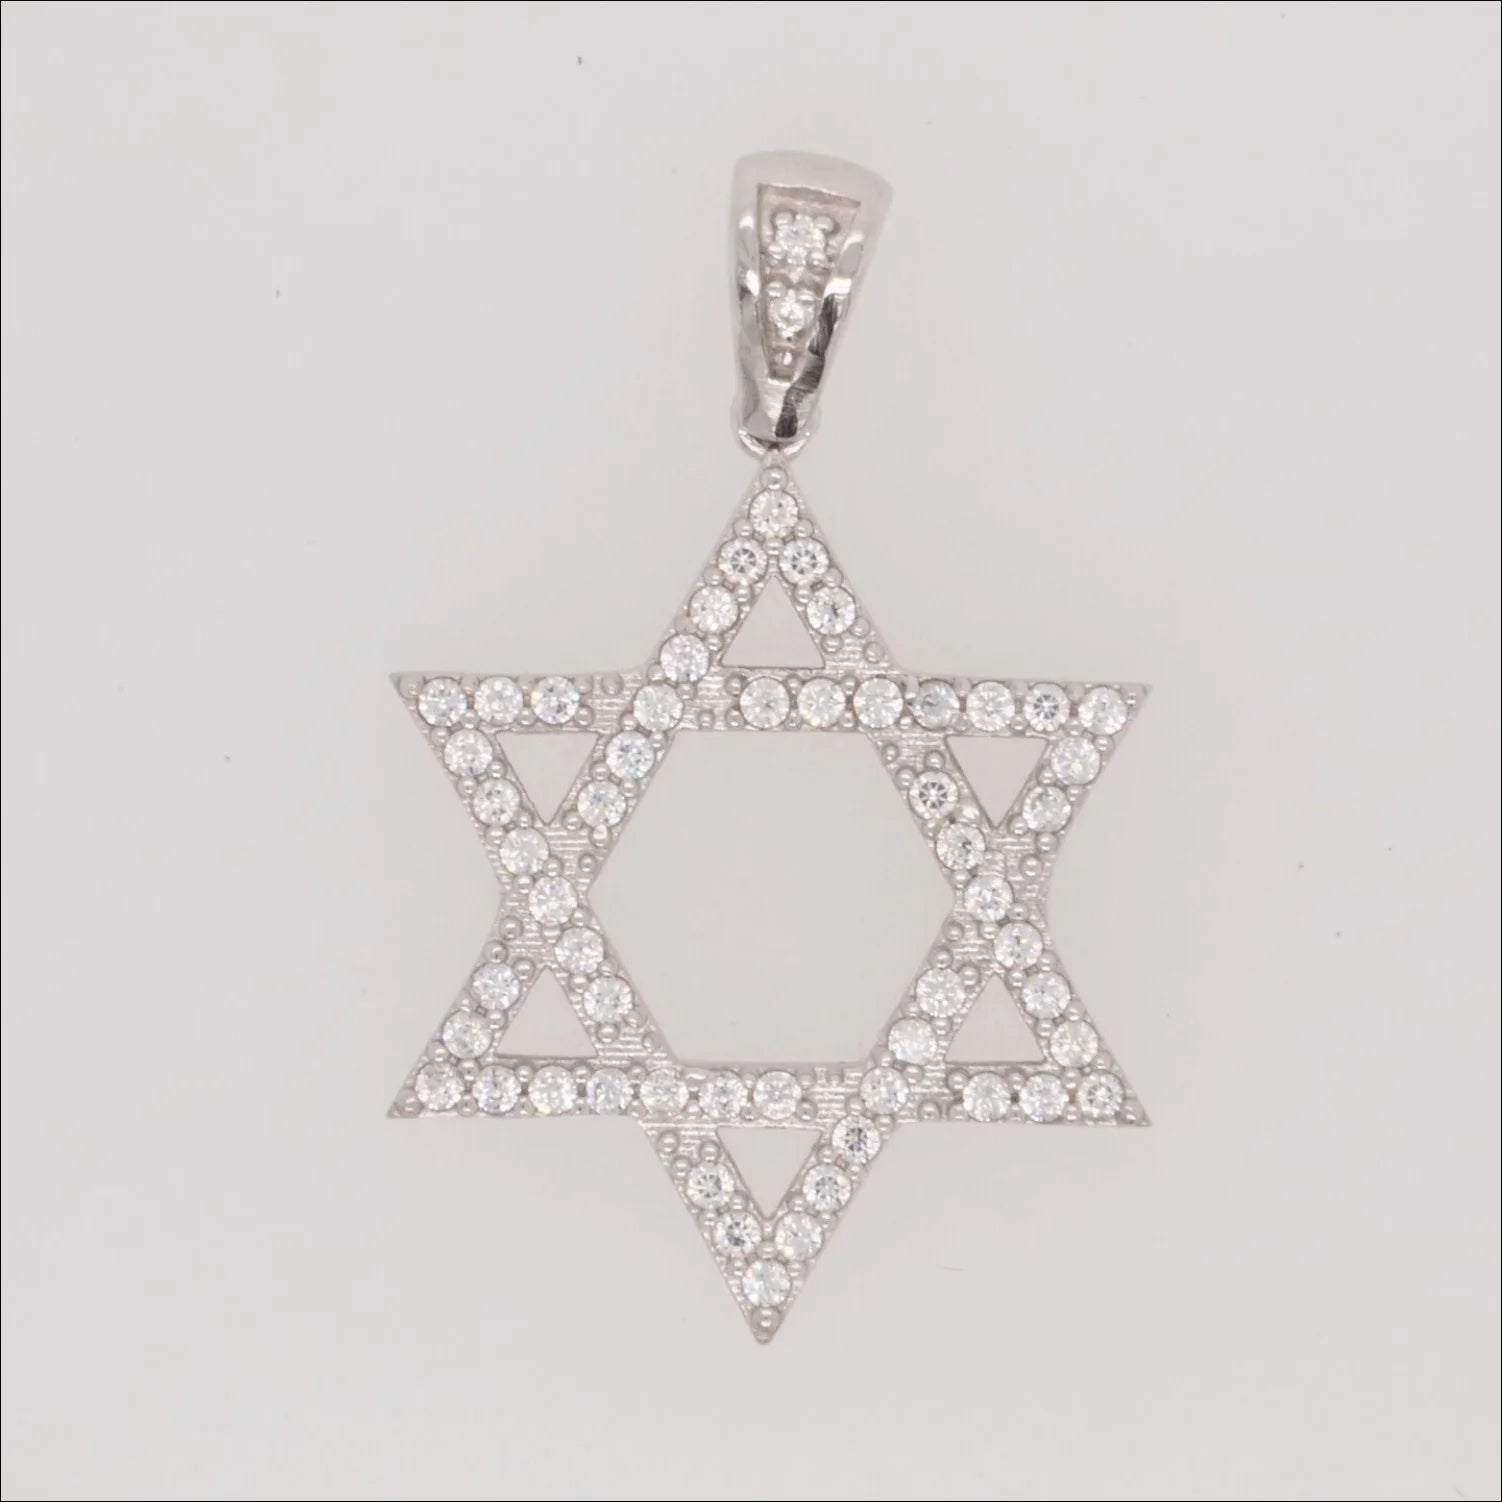 Elegant 18k White Gold Star of David with CZ | Home page